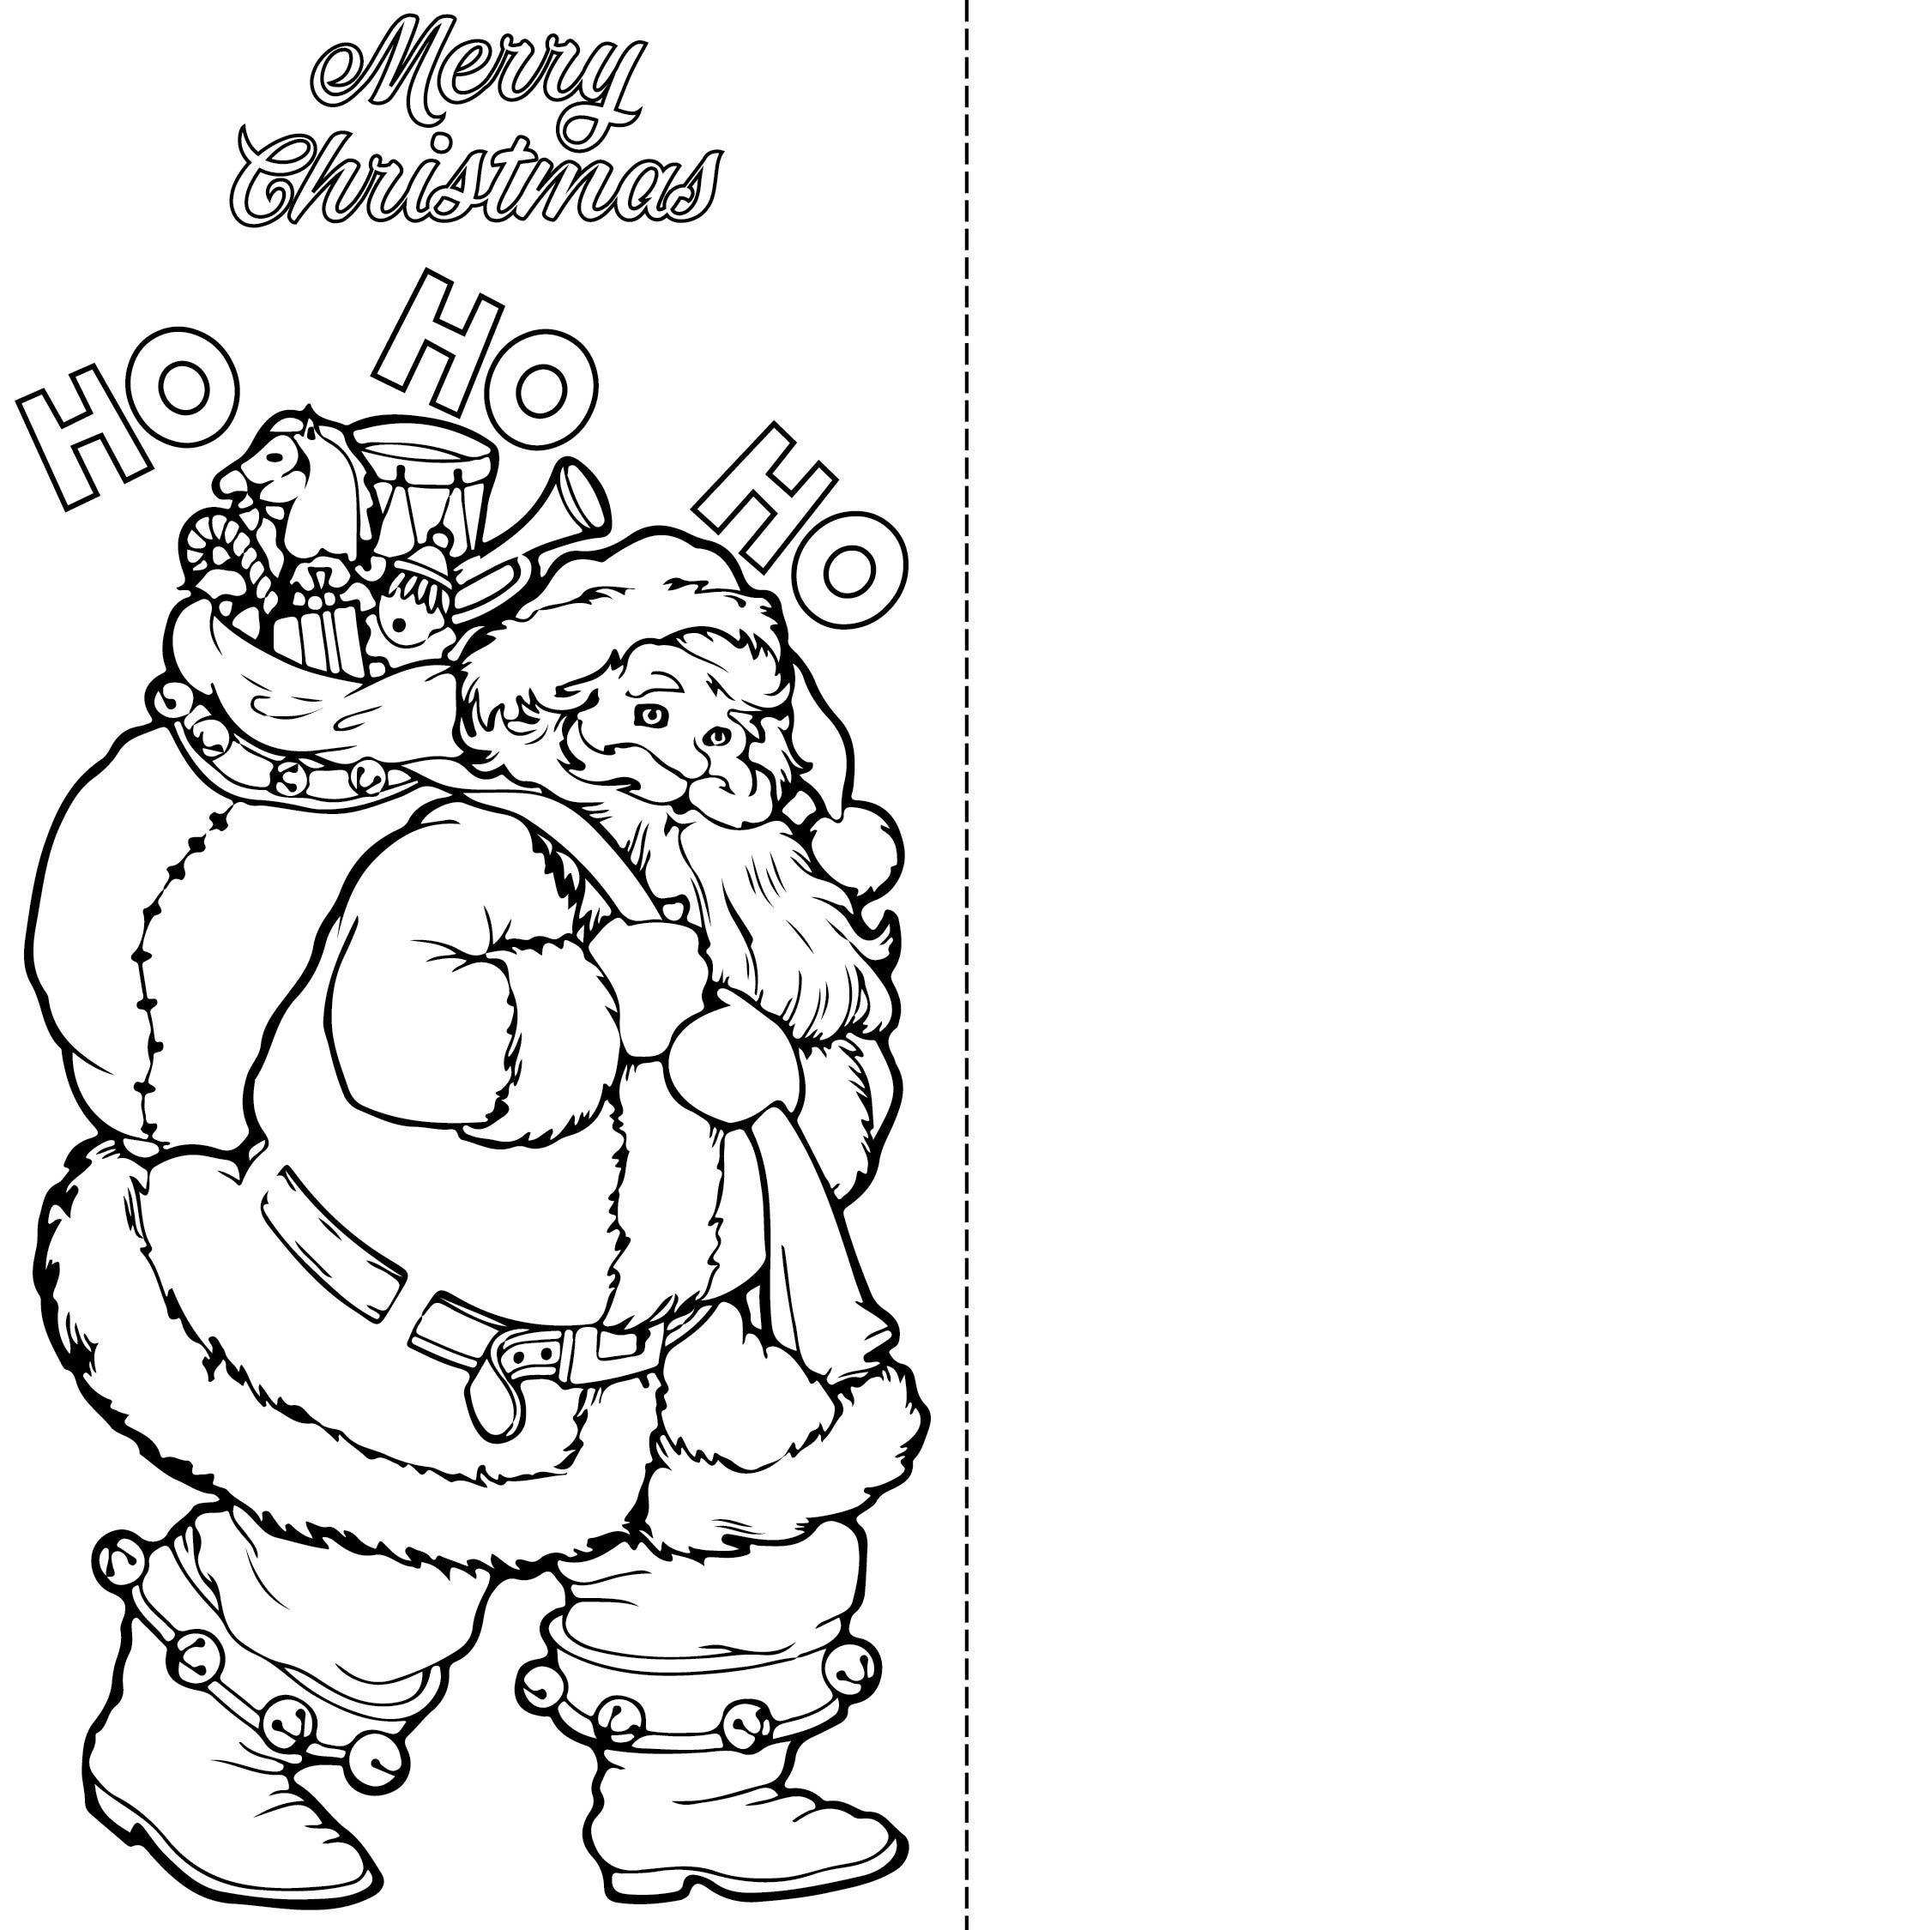 8 Best Images of Printable Christmas Cards To Color - Free Printable ...